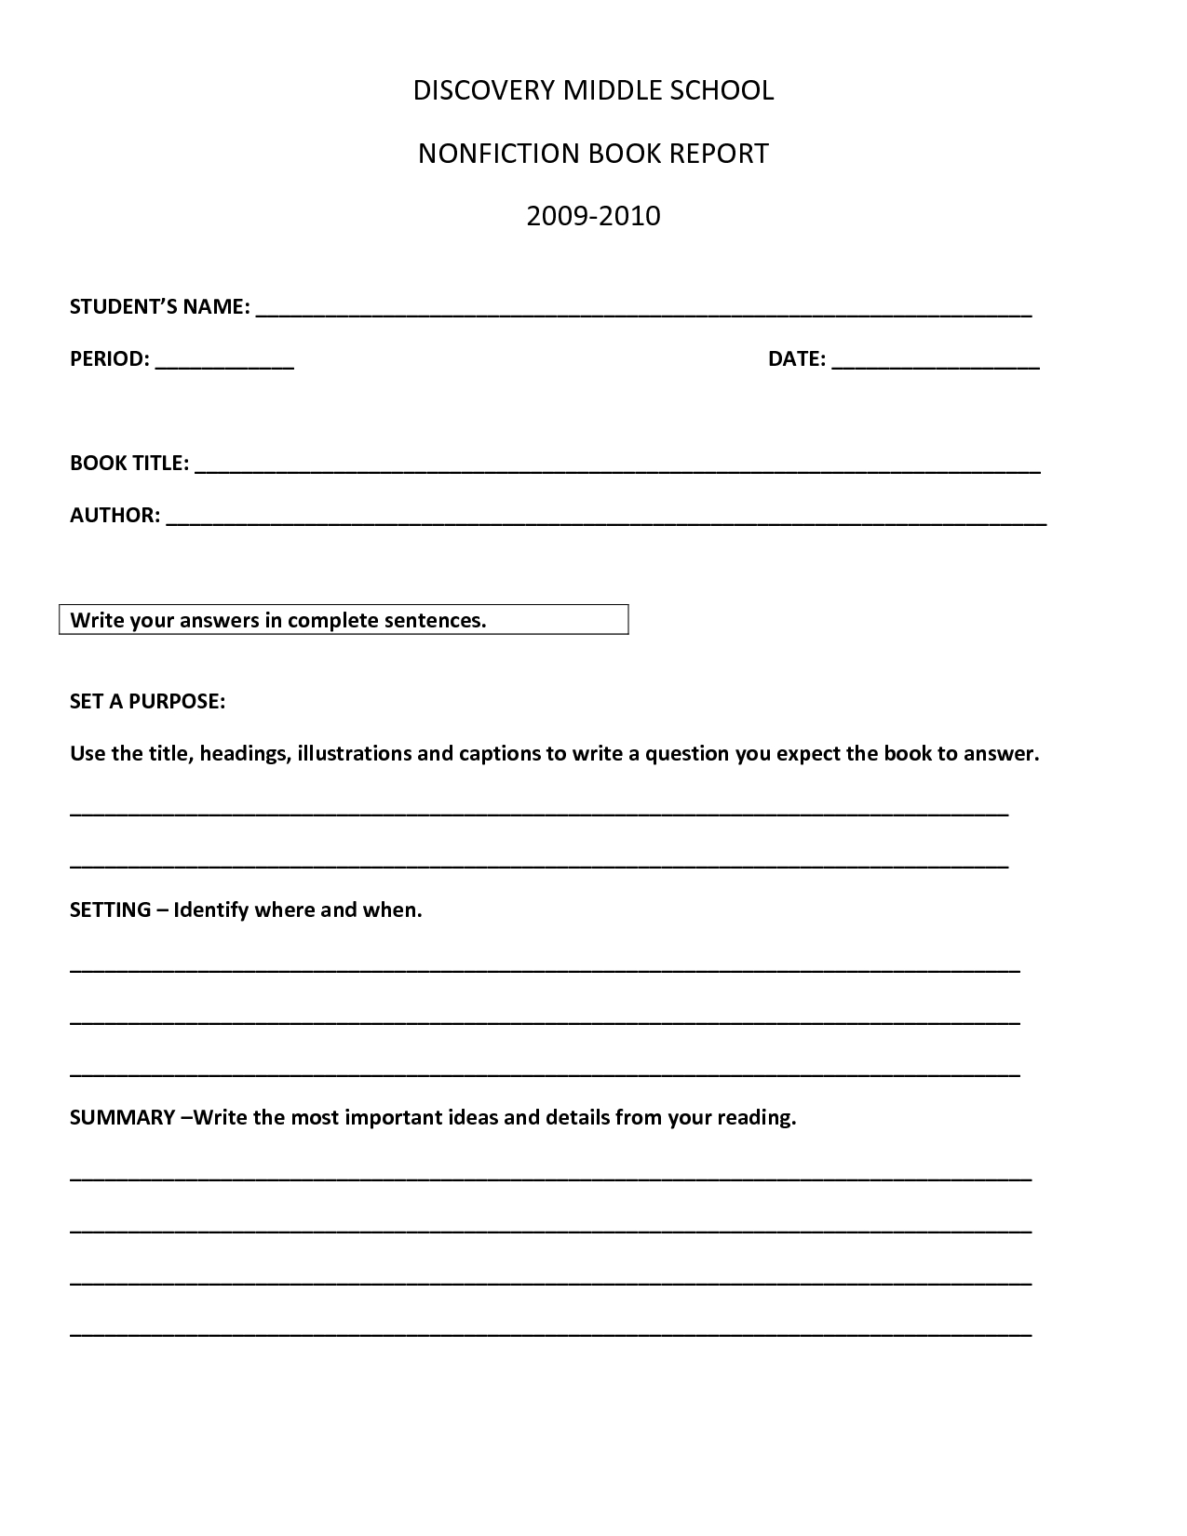 Non Fiction Book Report Template Middle School How To for Nonfiction